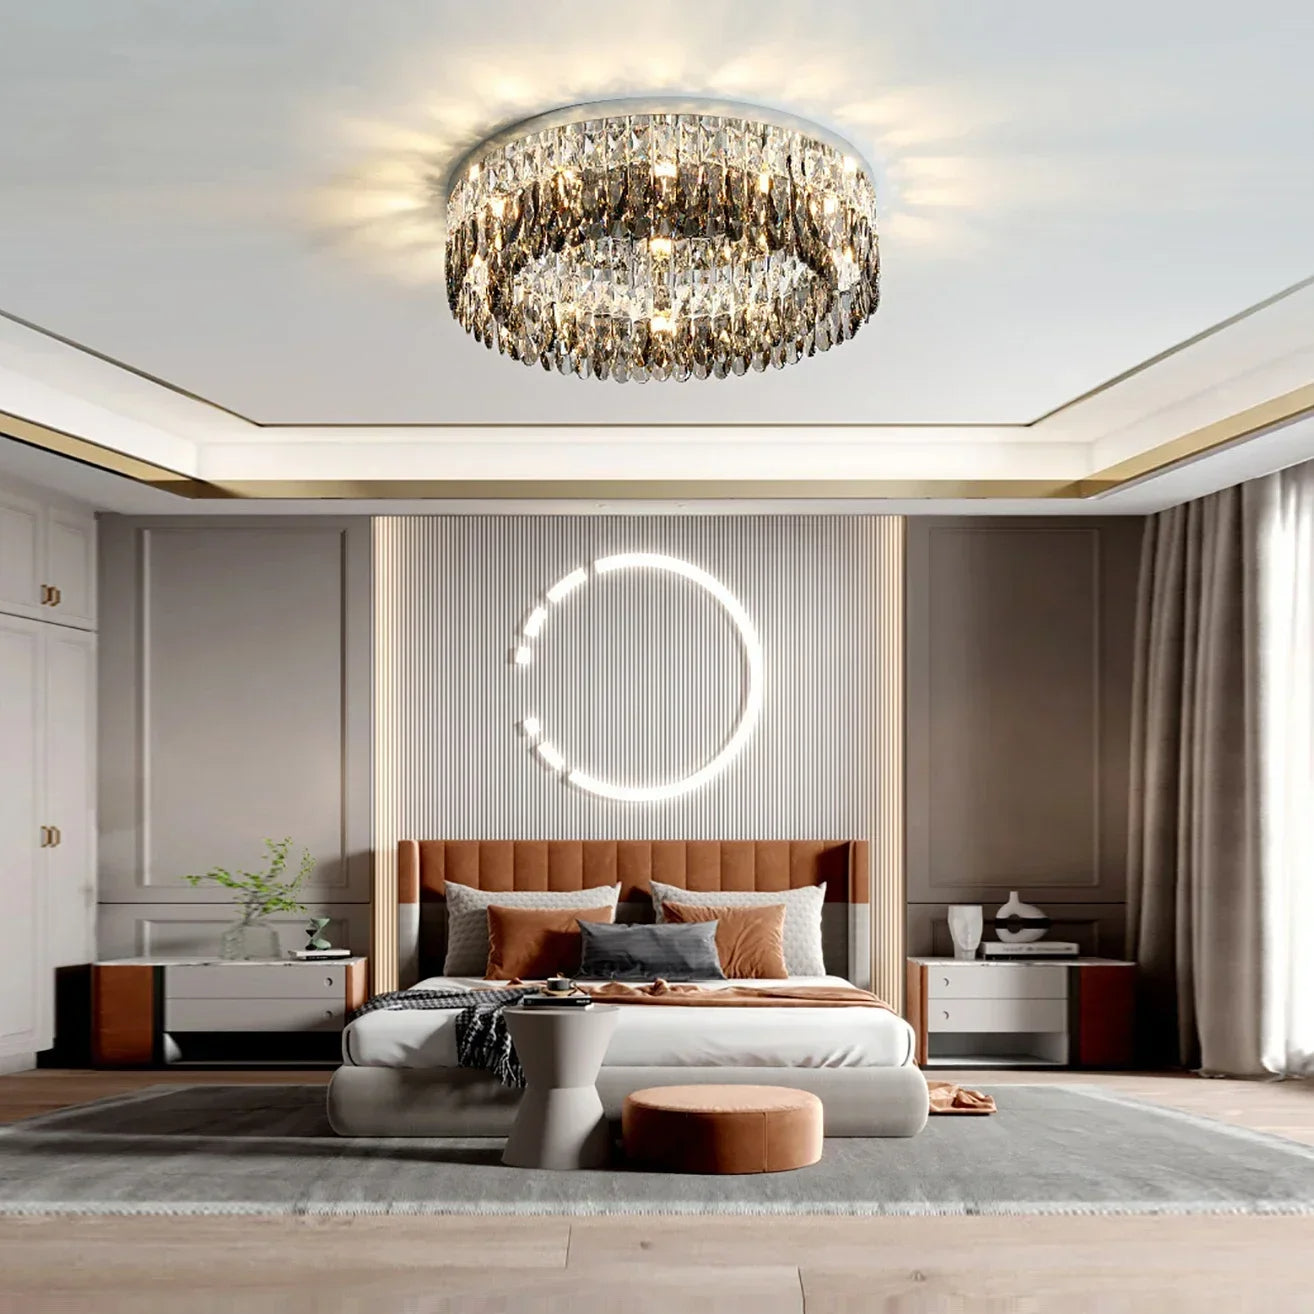 A modern bedroom featuring a large Giano Crystal Ceiling Light from Morsale.com on the ceiling. There is a bed with an upholstered headboard adorned with pillows and a throw blanket. A round illuminated wall decor hangs above the bed. Two nightstands flank the bed, and a large window lets in natural light.